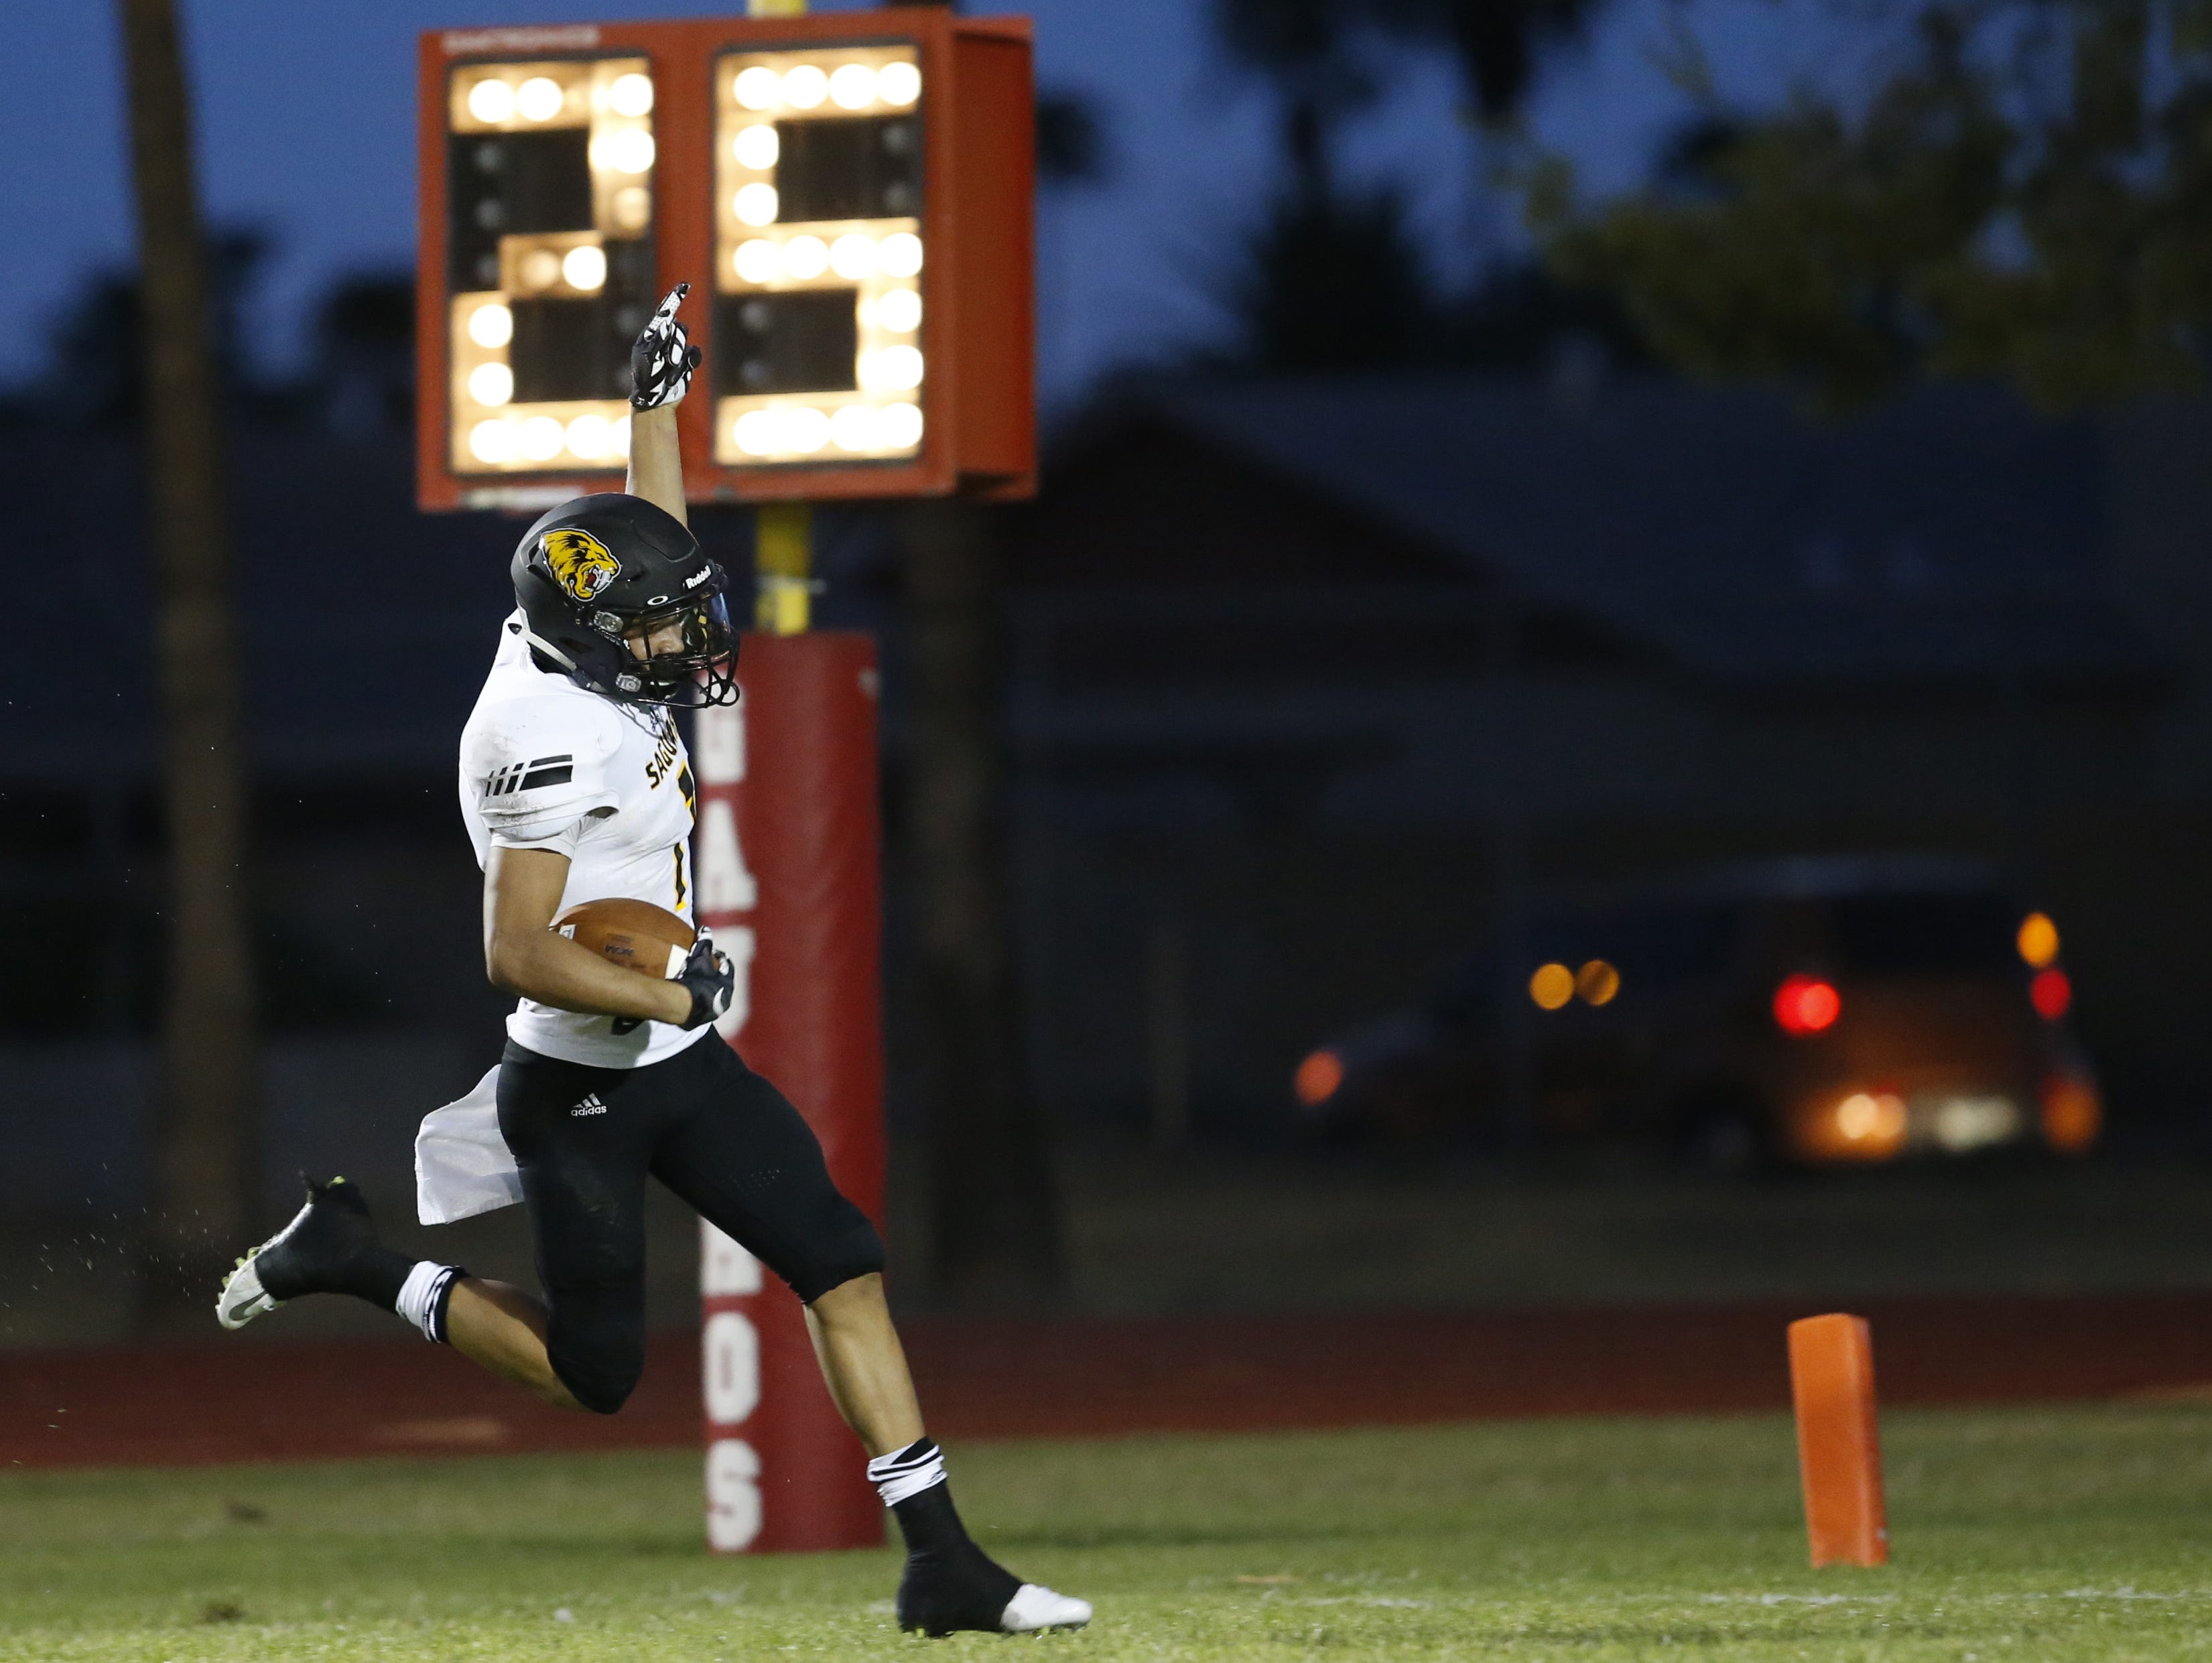 Byron Murphy, 6-foot, 170 pounds, is rated the top prospect in the 2016 class by azcentral sports.